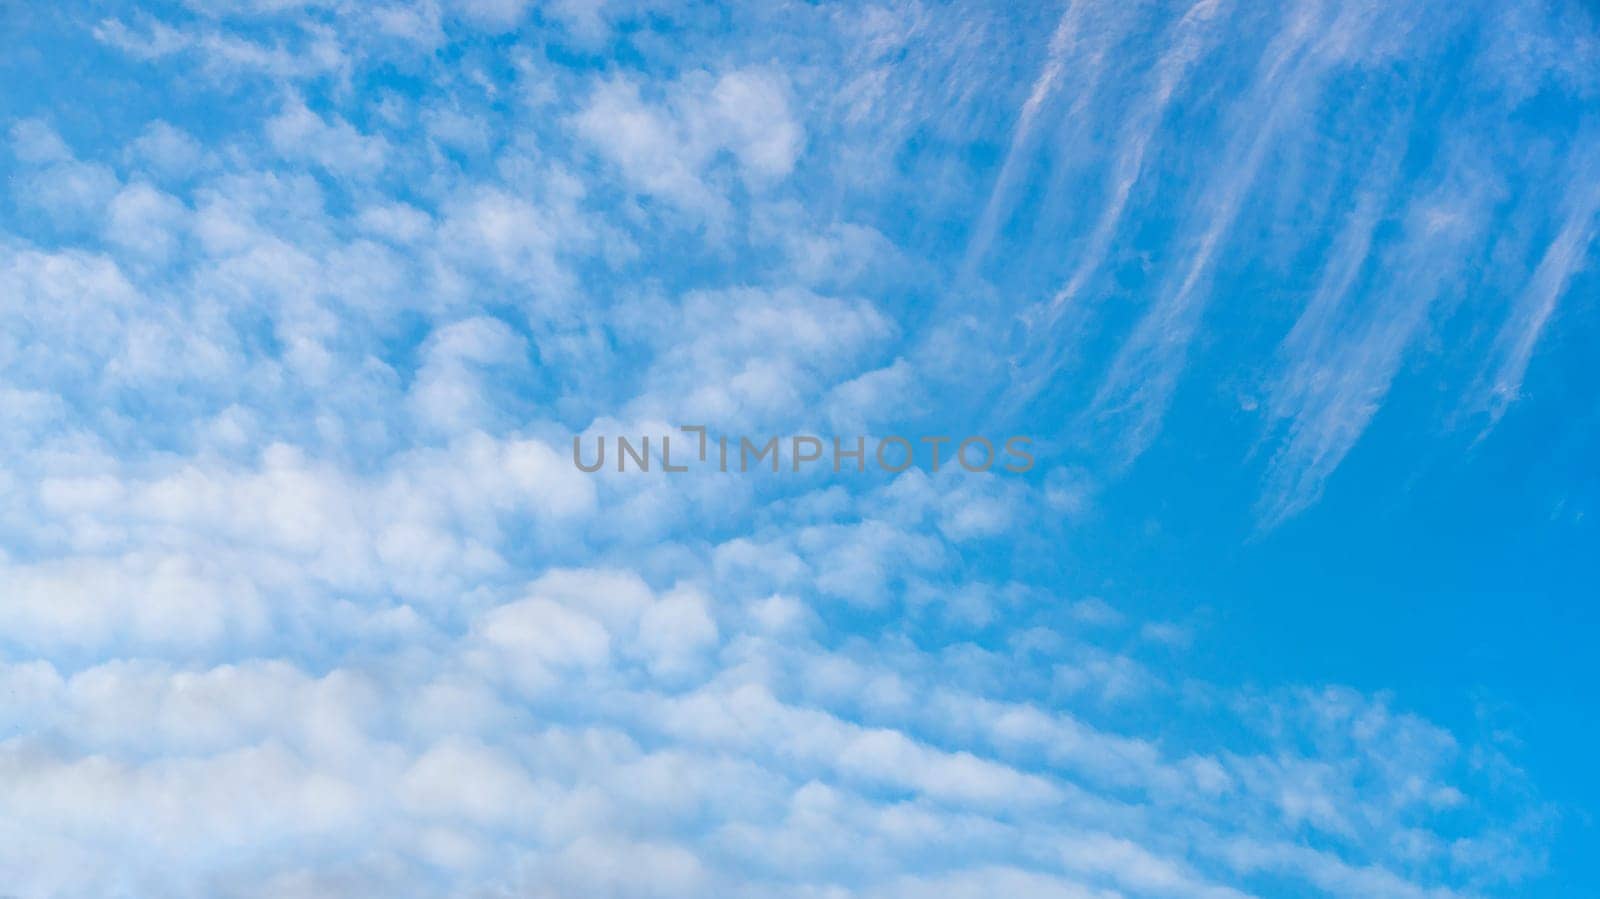 A blue sky background with white clouds by Renisons